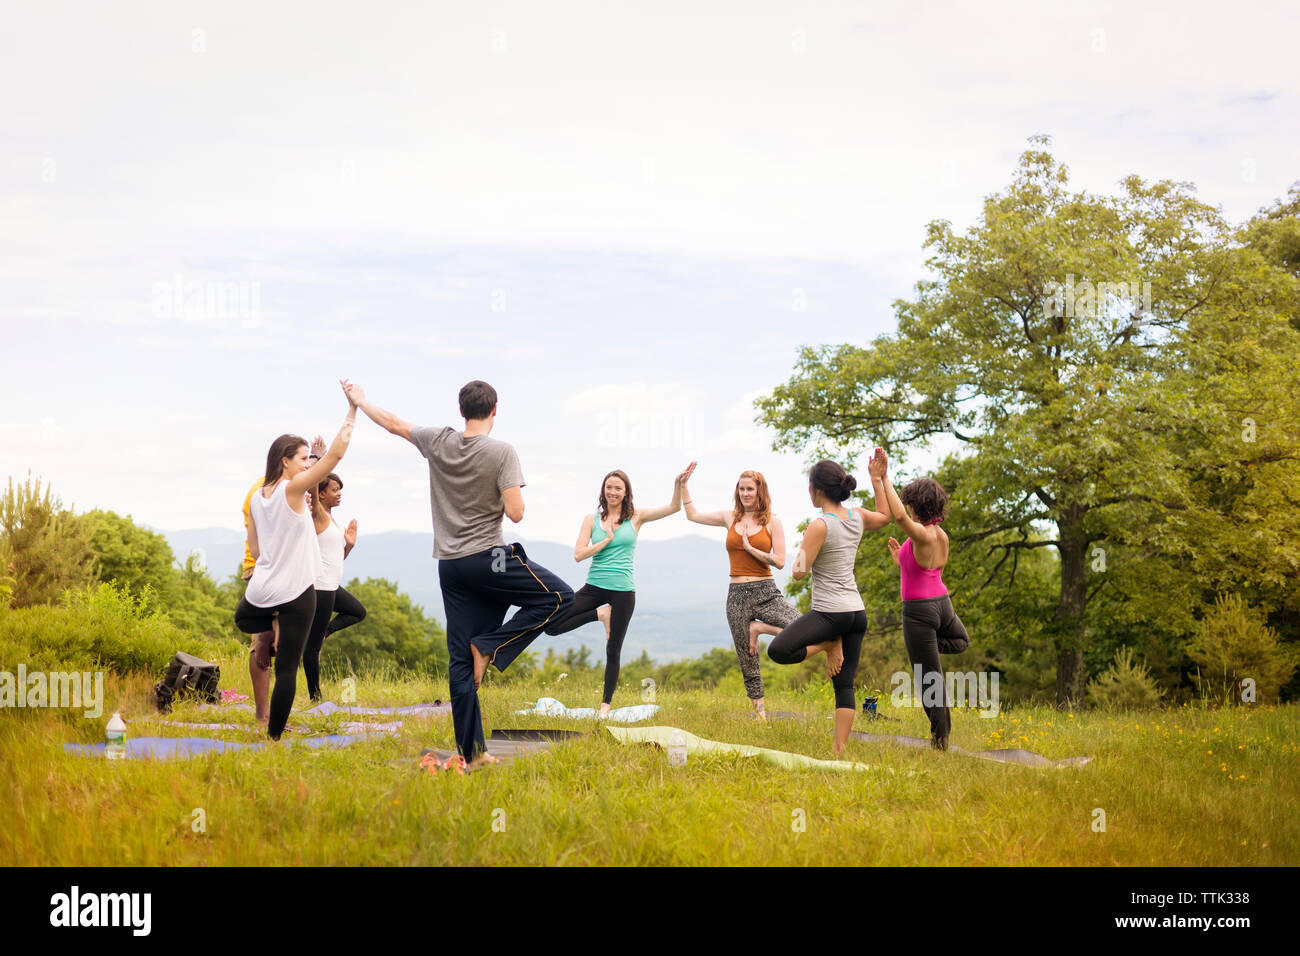 Friends exercising on field against sky Stock Photo